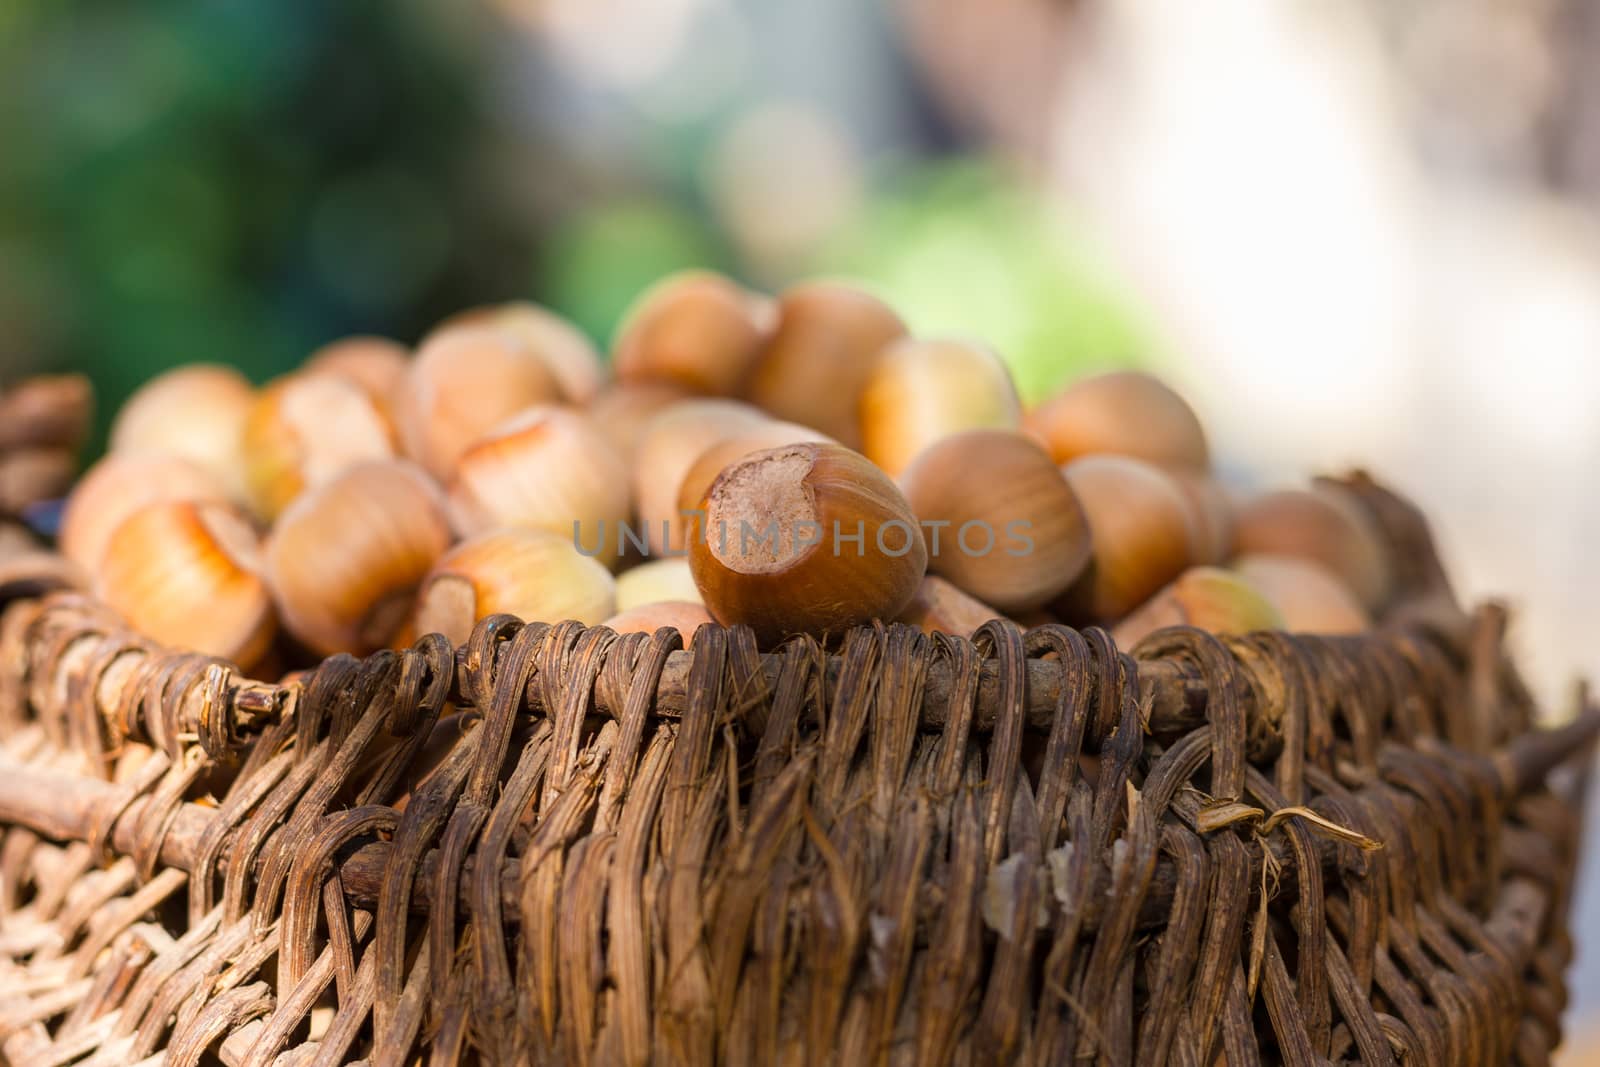 A basket of toasted hazelnuts inviting